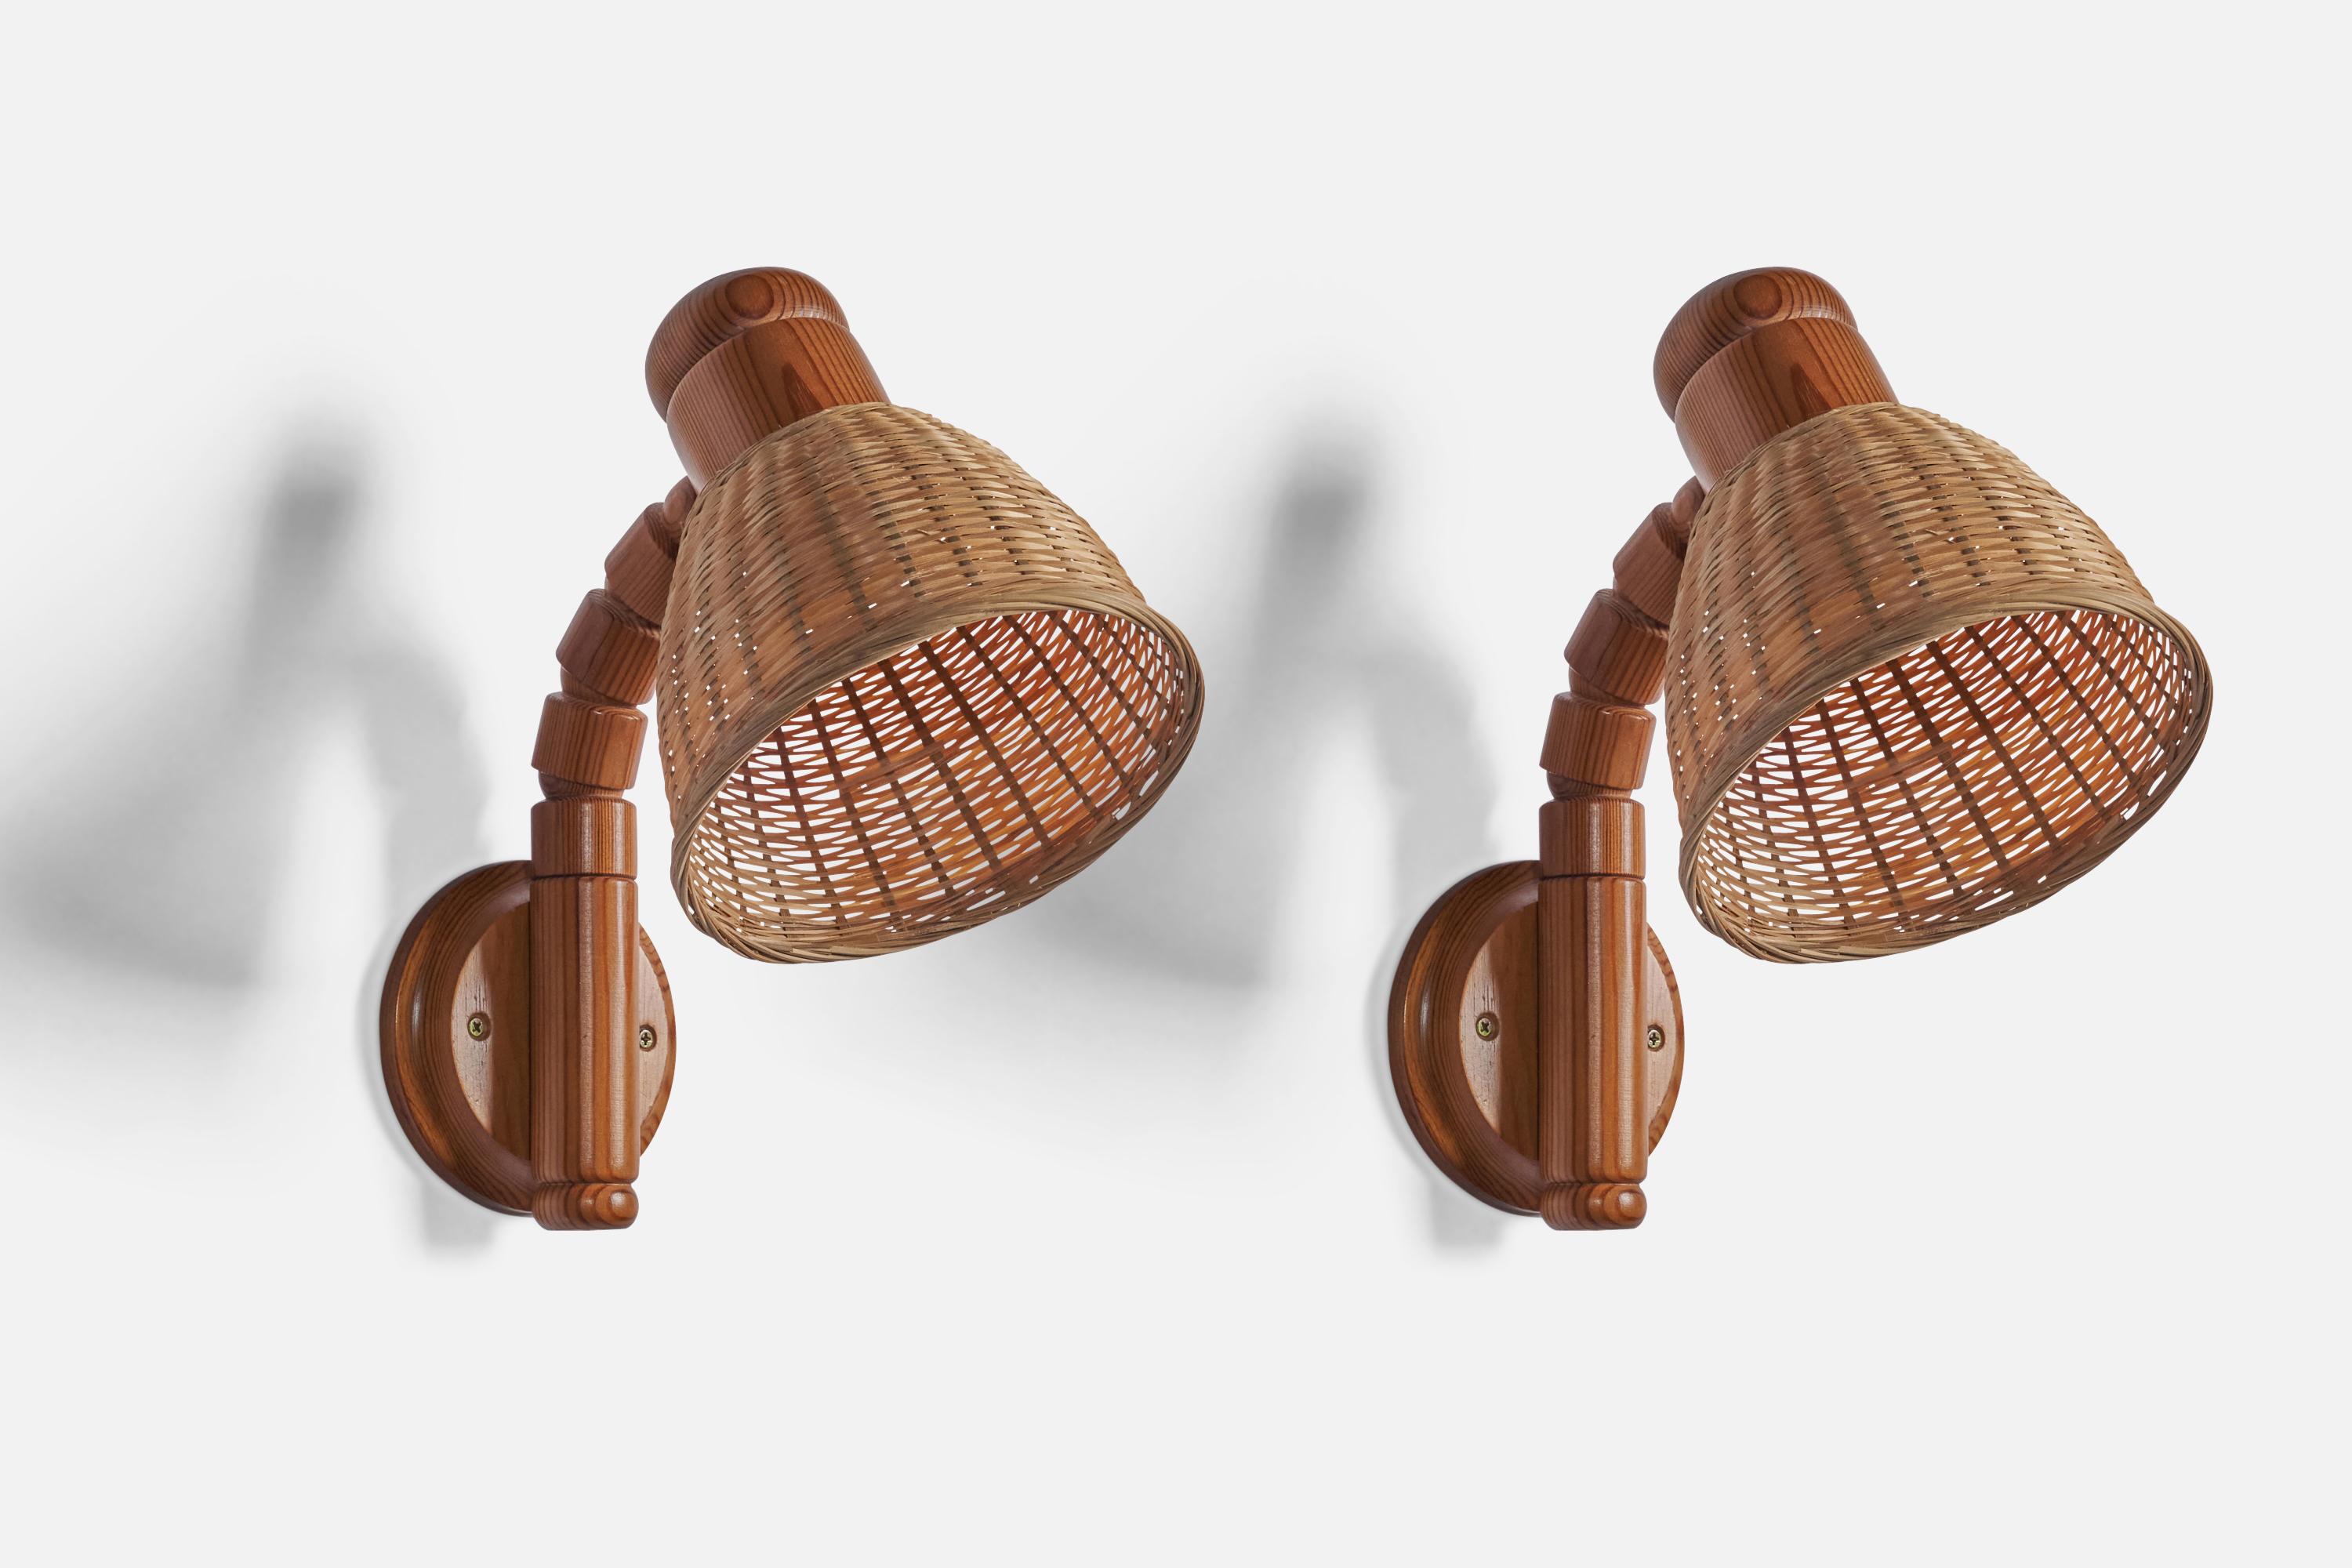 A pair of adjustable pine and rattan wall lights designed and produced by Solbackens Svarveri, Sweden, c. 1970s.

Overall Dimensions (inches): 12” H x 6.6” W x 11.25” D 
Bulb Specifications: E-26
Number of Sockets: 1